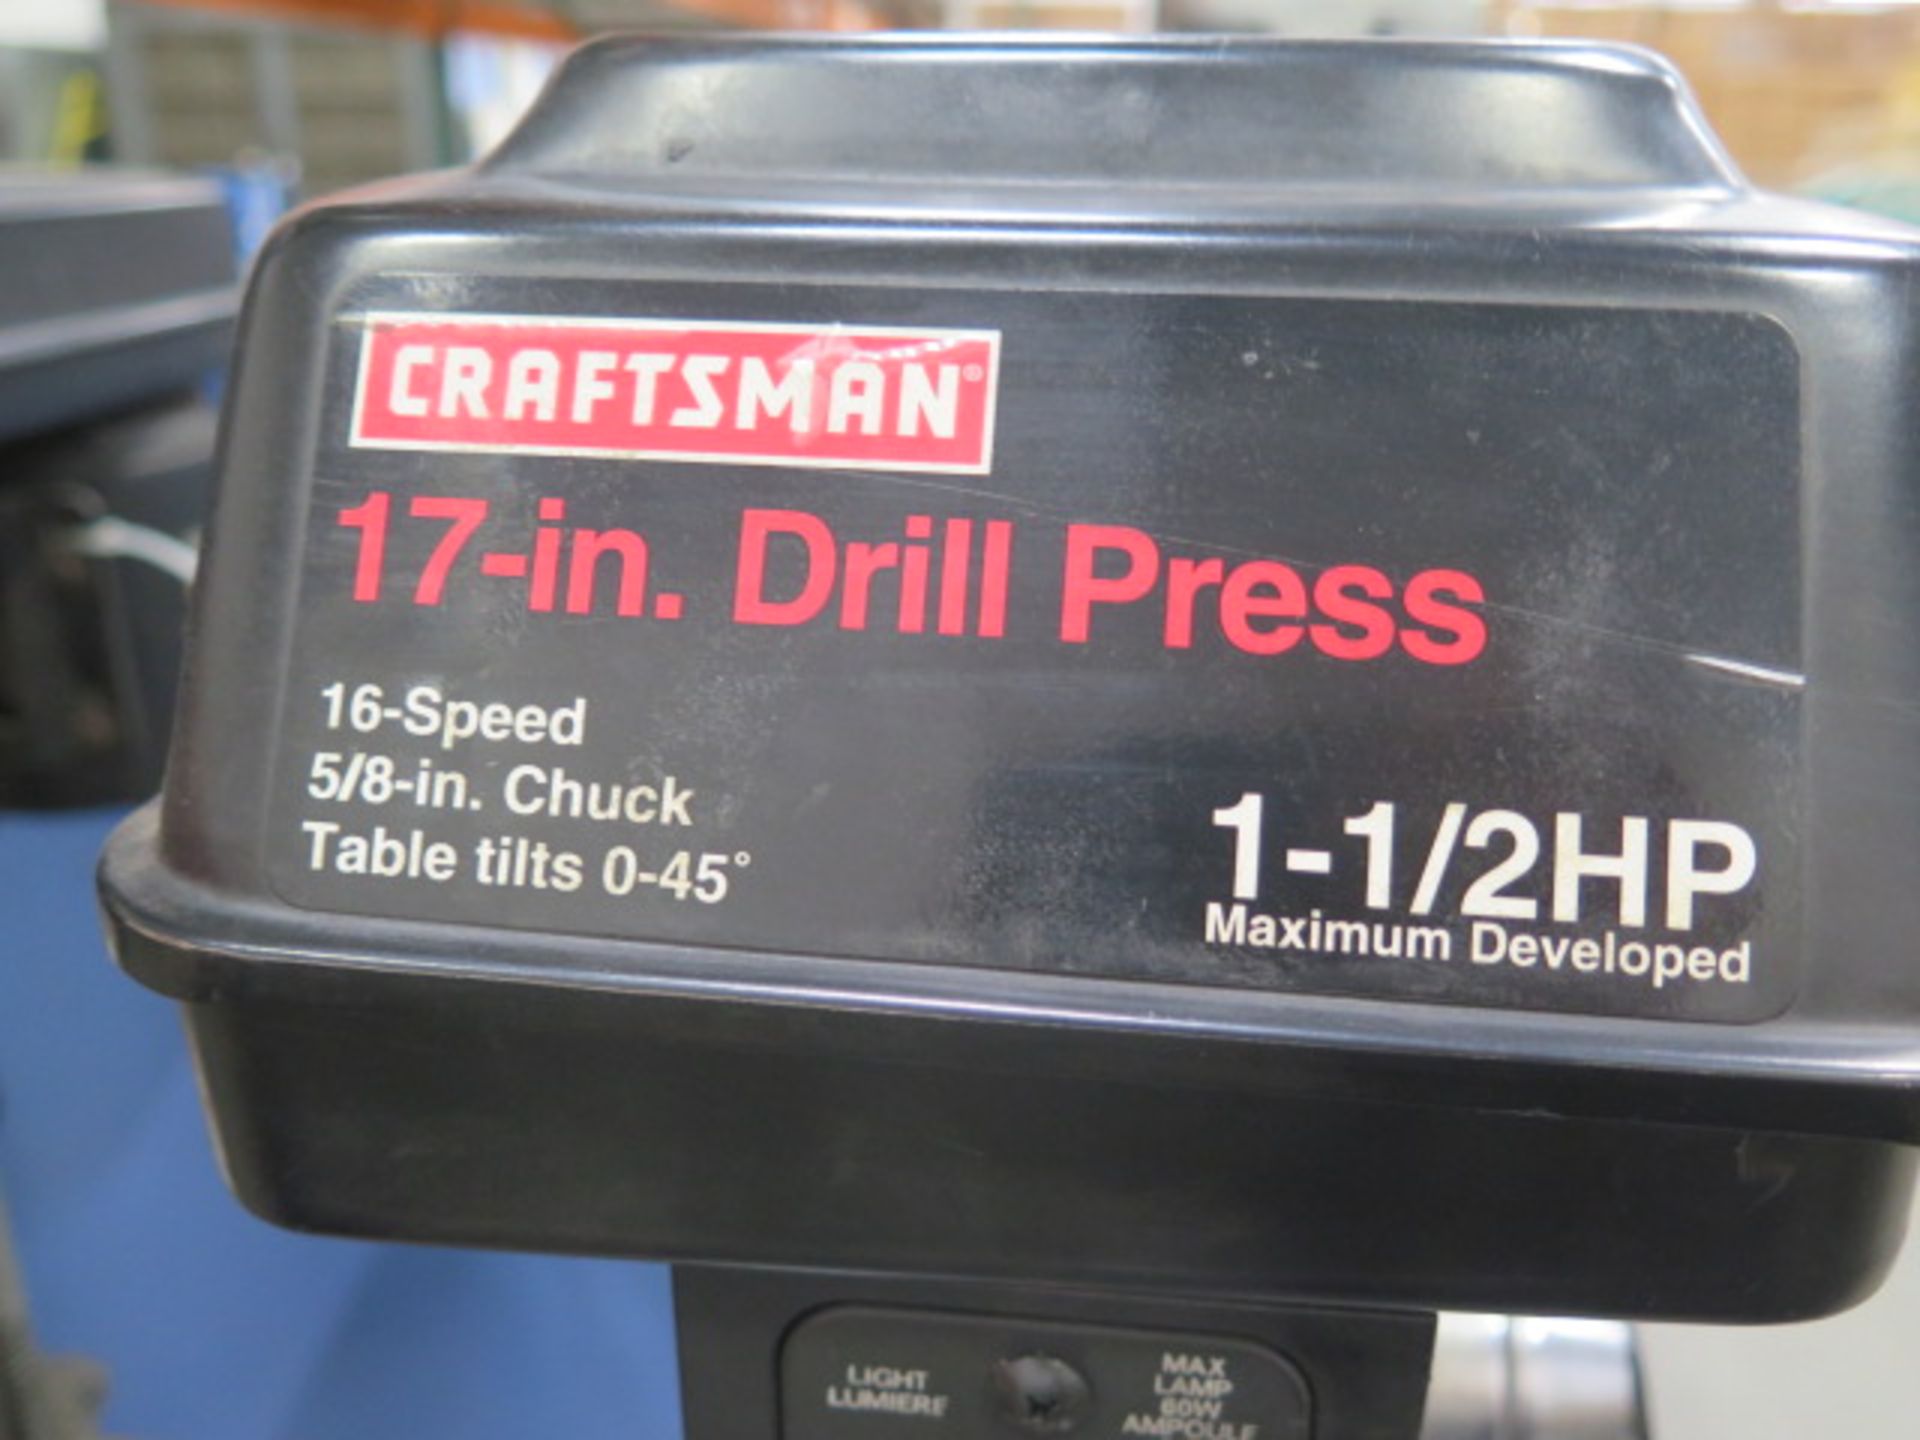 Craftsman 17" 16-Speed Pedestal Drill Press (SOLD AS-IS - NO WARRANTY) - Image 3 of 6